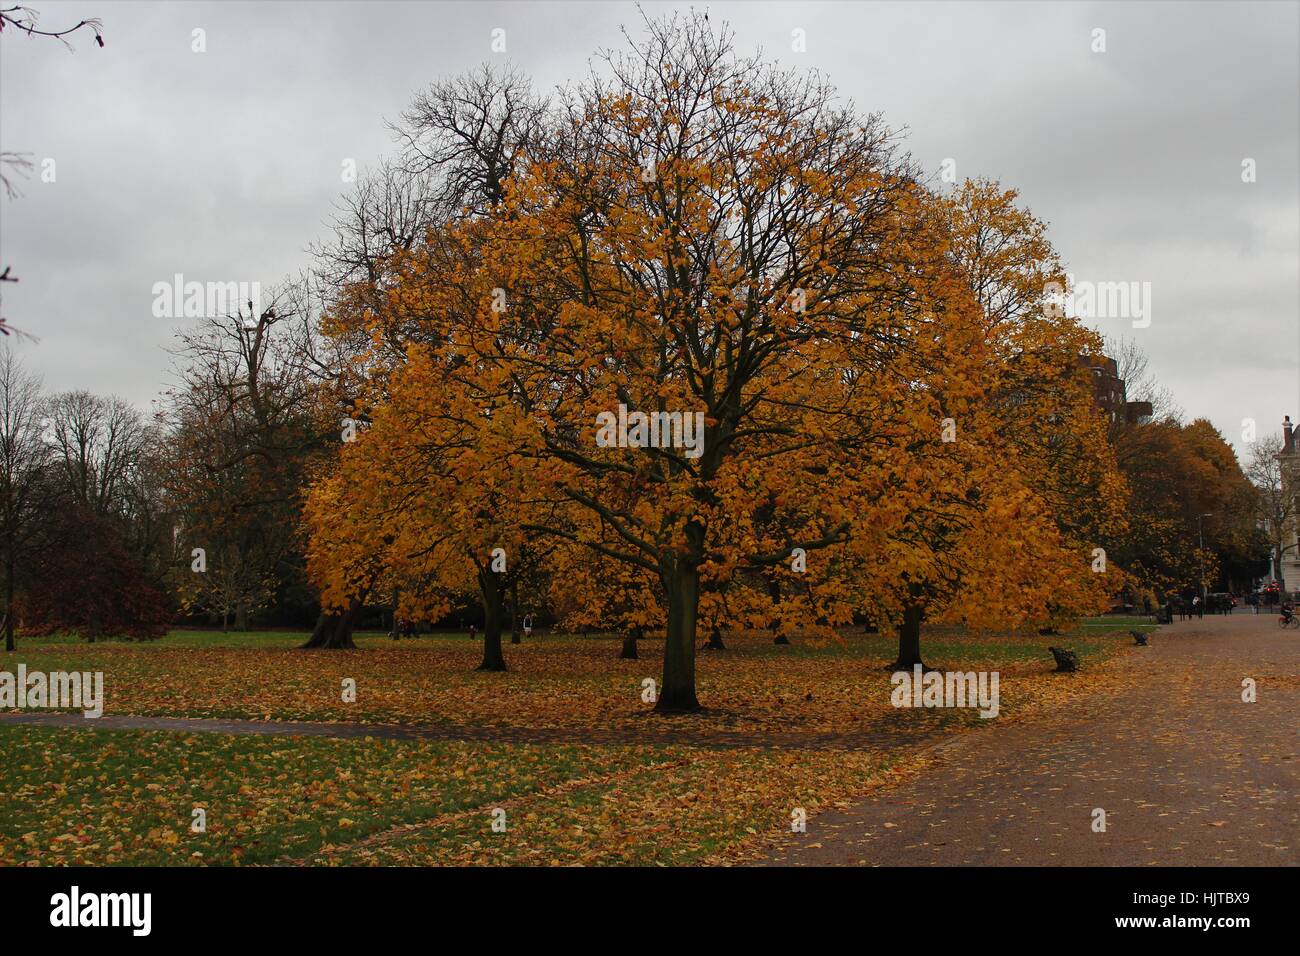 Golden autumn tree over a blanket of leaves Stock Photo